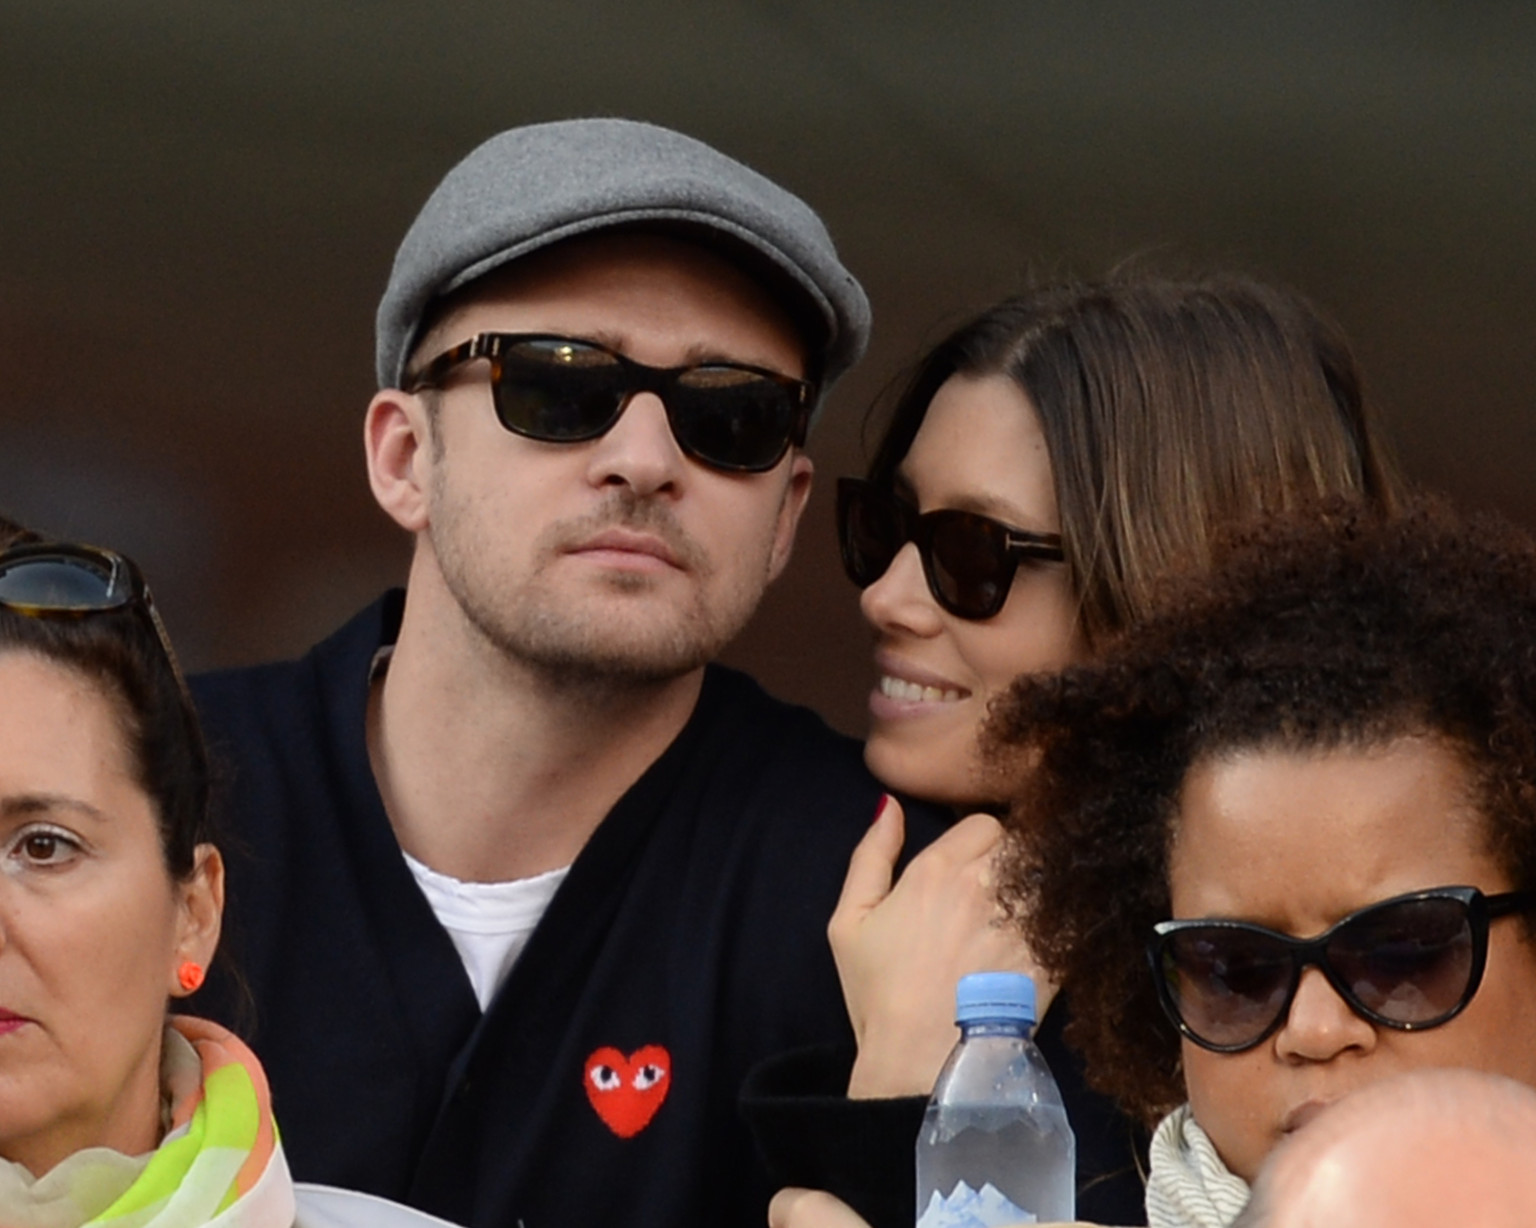 Justin Timberlake And Jessica Biel Share Sweet PDA At The U.S. Open | HuffPost